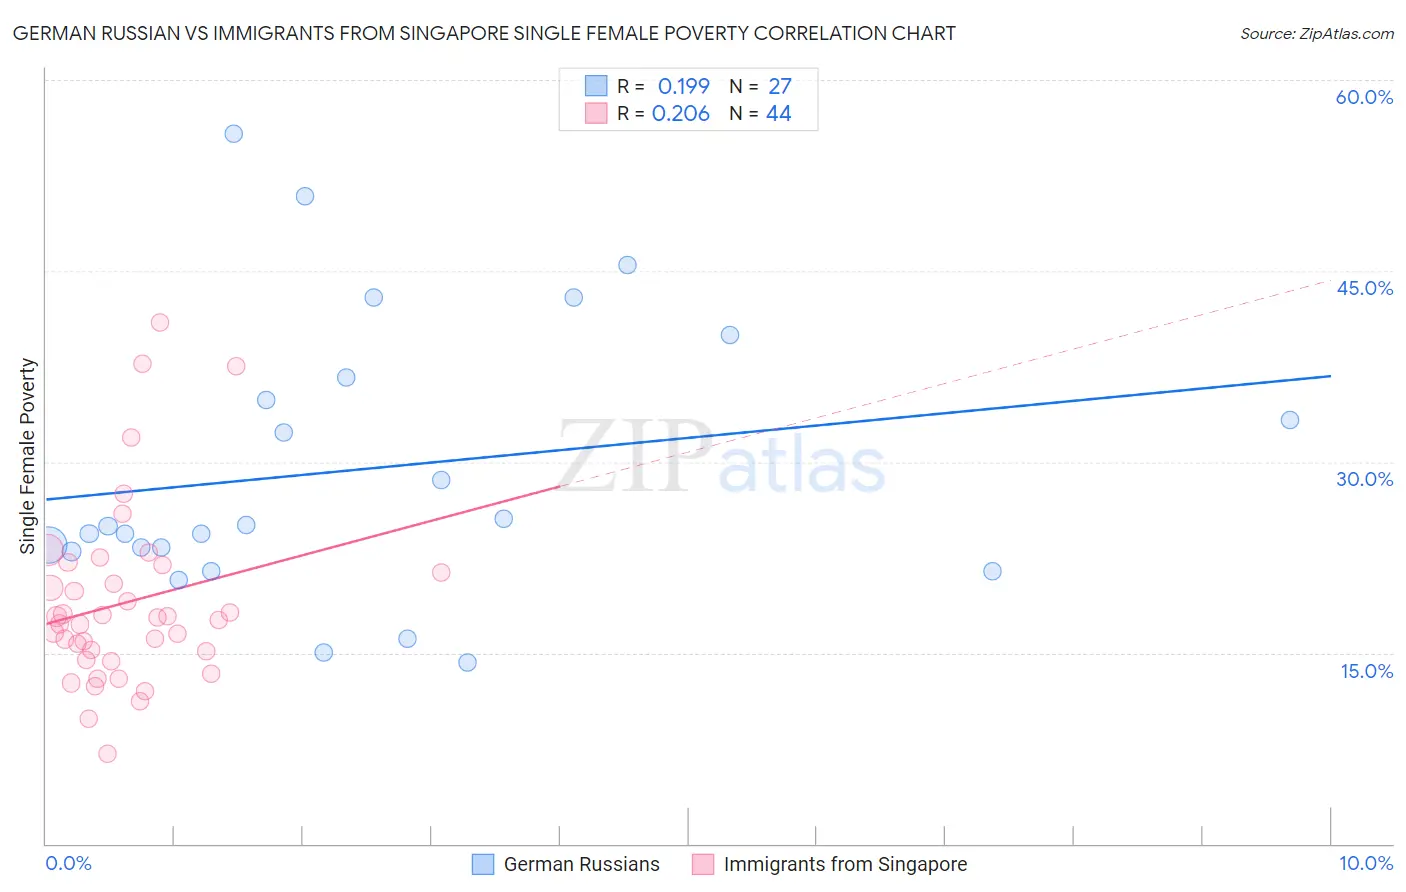 German Russian vs Immigrants from Singapore Single Female Poverty